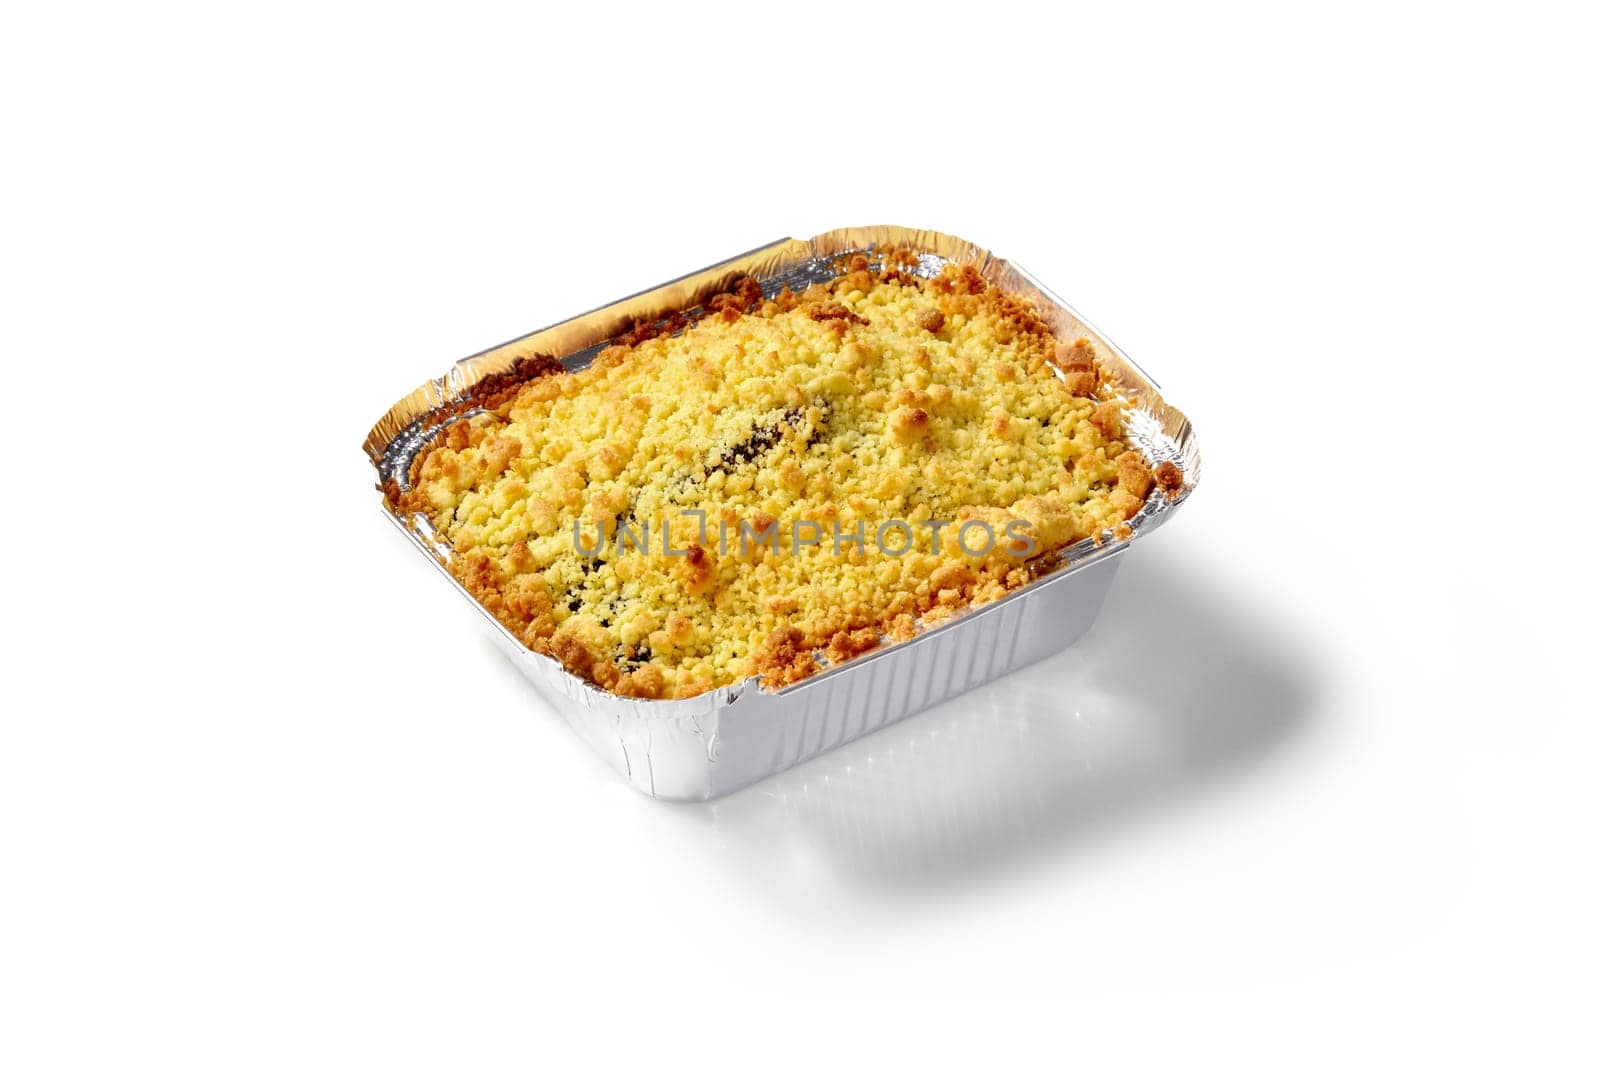 Delicious berry crumble pie with golden topping, baked to perfection and presented in disposable foil baking tray on white background